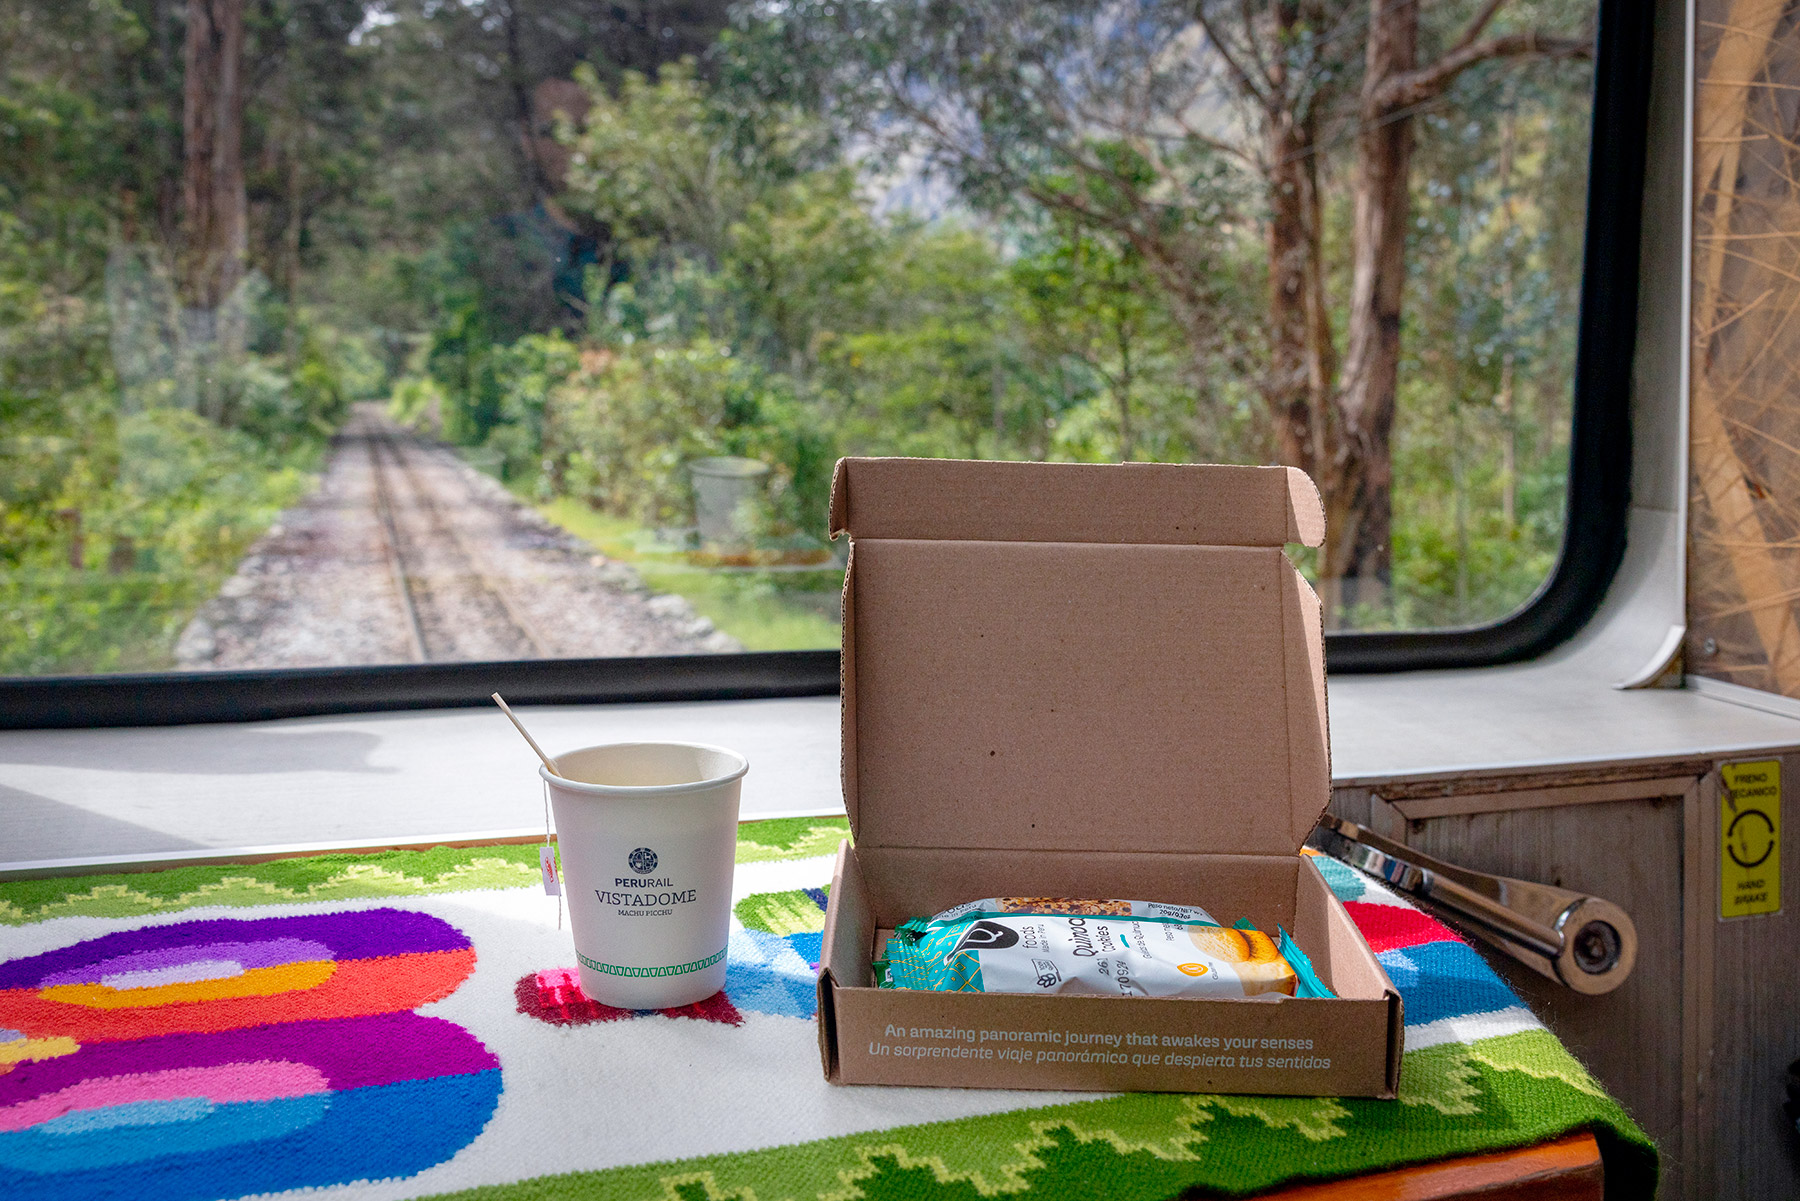 Vistadome passengers get tea or coffee, and a snack box for the ride